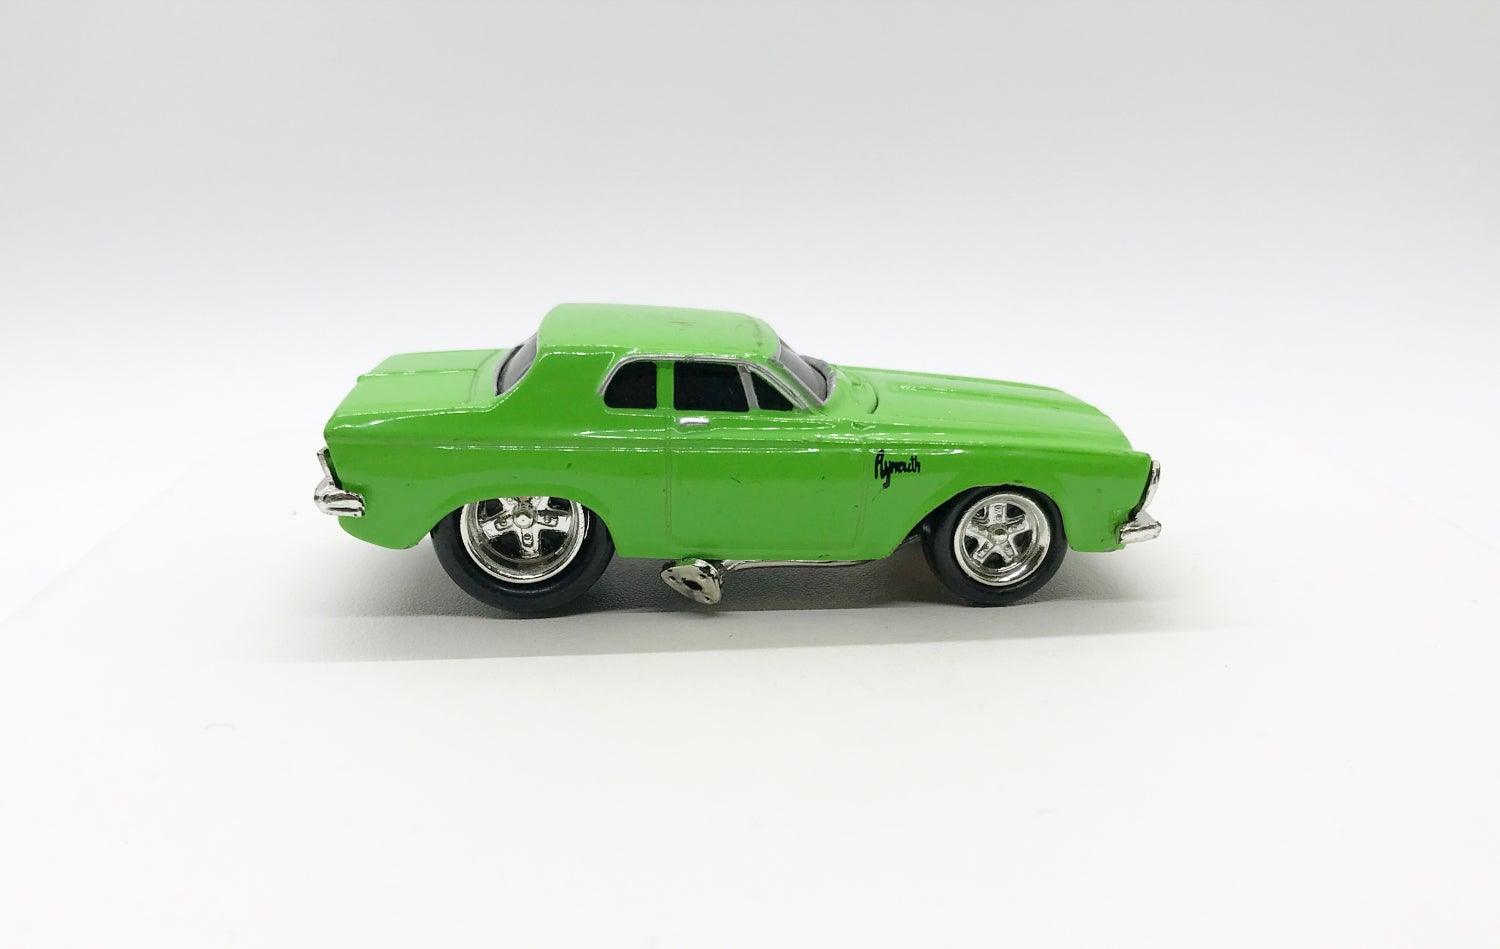 Funline Muscle Machine Green Plymouth (2002) - Lamoree’s Vintage